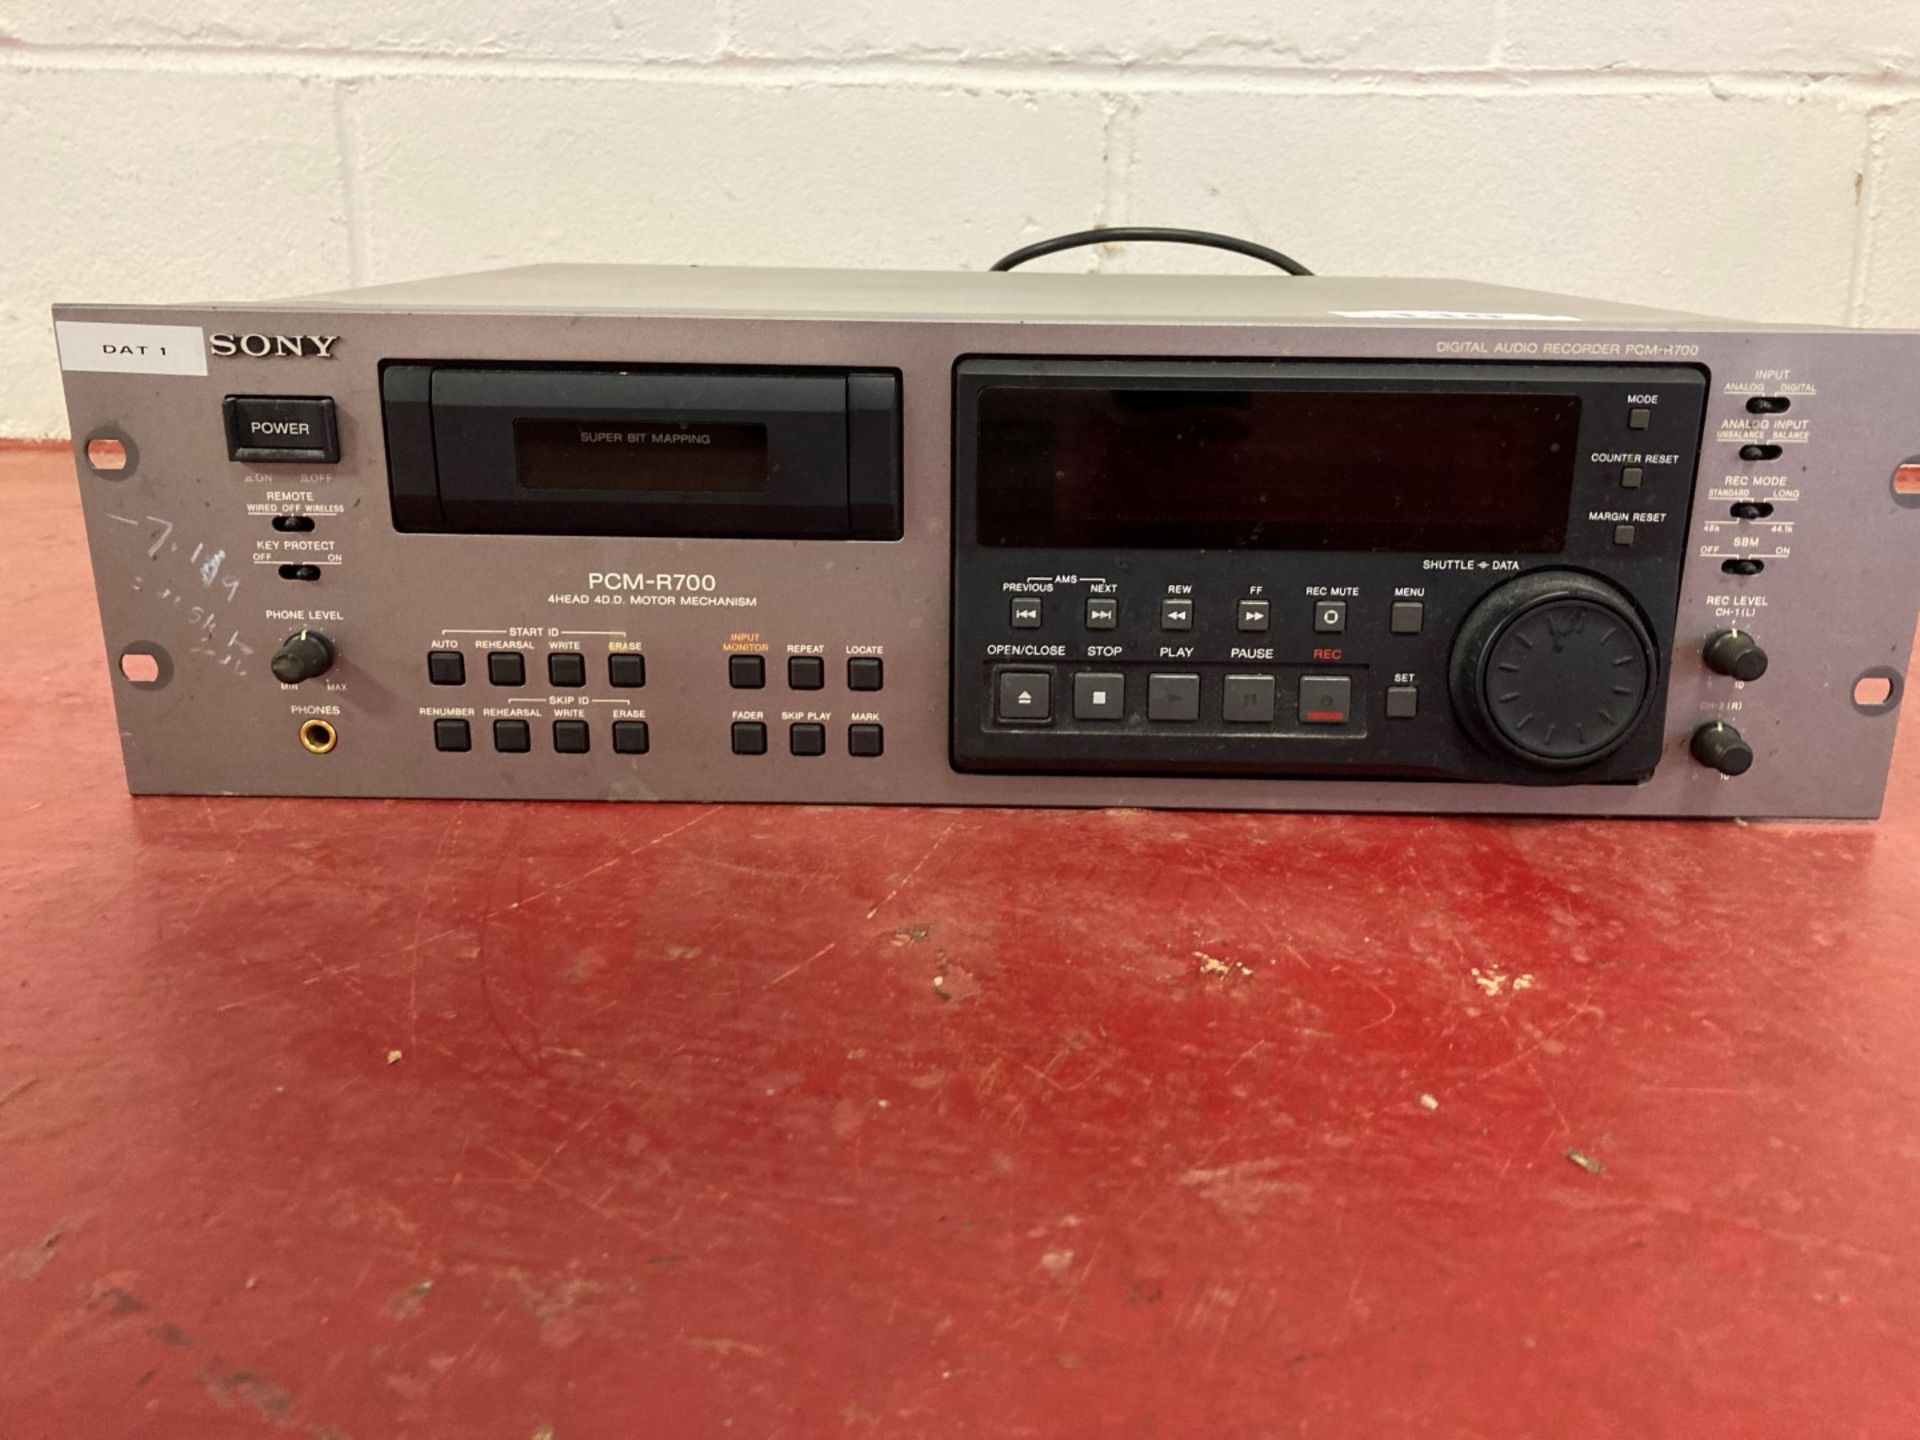 Sony PCM-R700 professional DAT recorder - Image 2 of 5